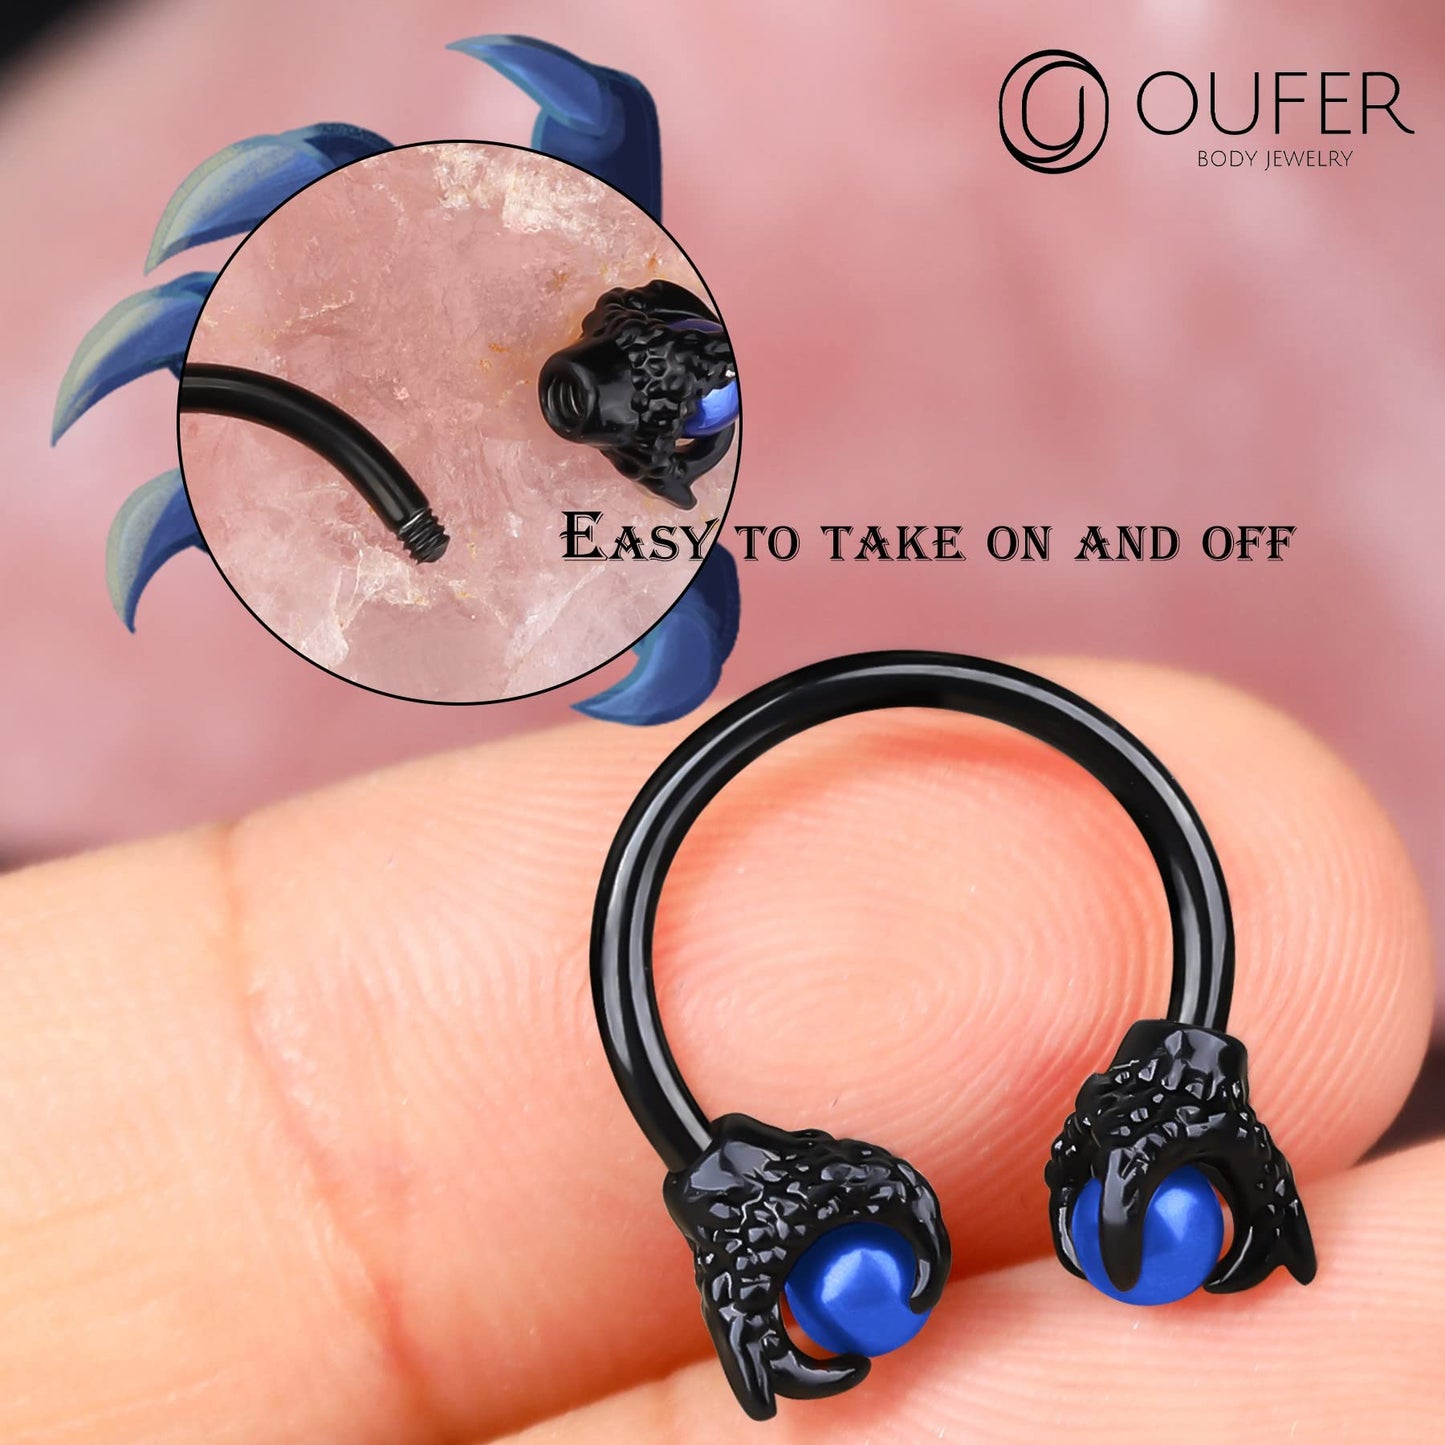 OUFER 316L Surgical Steel Circular Earrings Two White Opals Surrounded by Dragon Claws Cartilage Earing Ear Body Piercing Jewelry Helix Earrings Piercing…